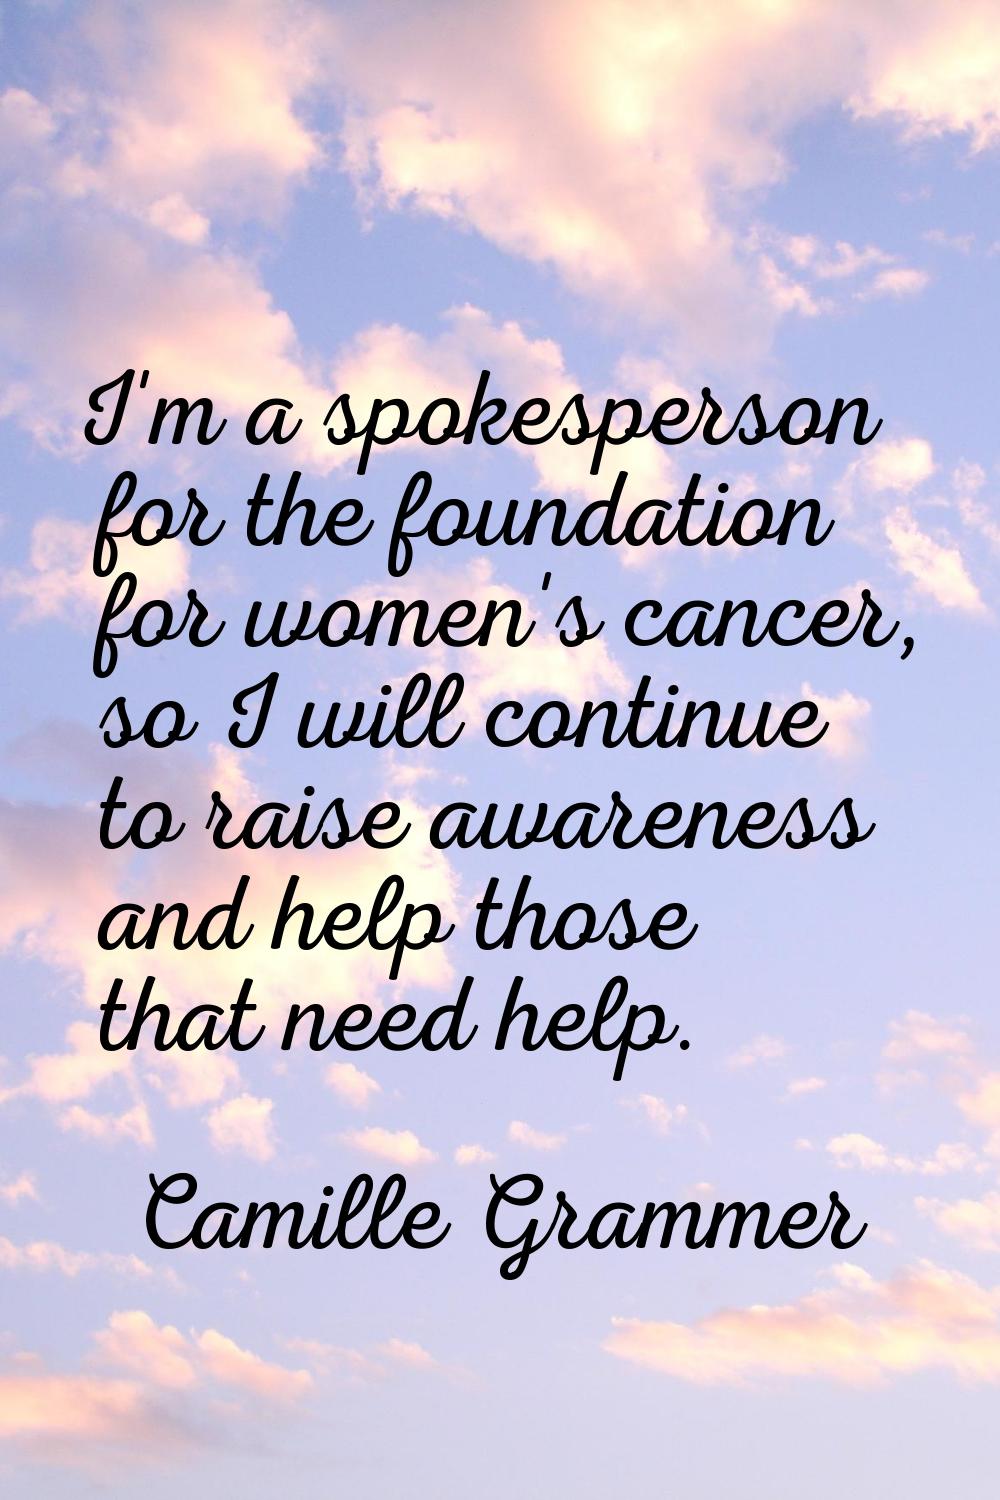 I'm a spokesperson for the foundation for women's cancer, so I will continue to raise awareness and